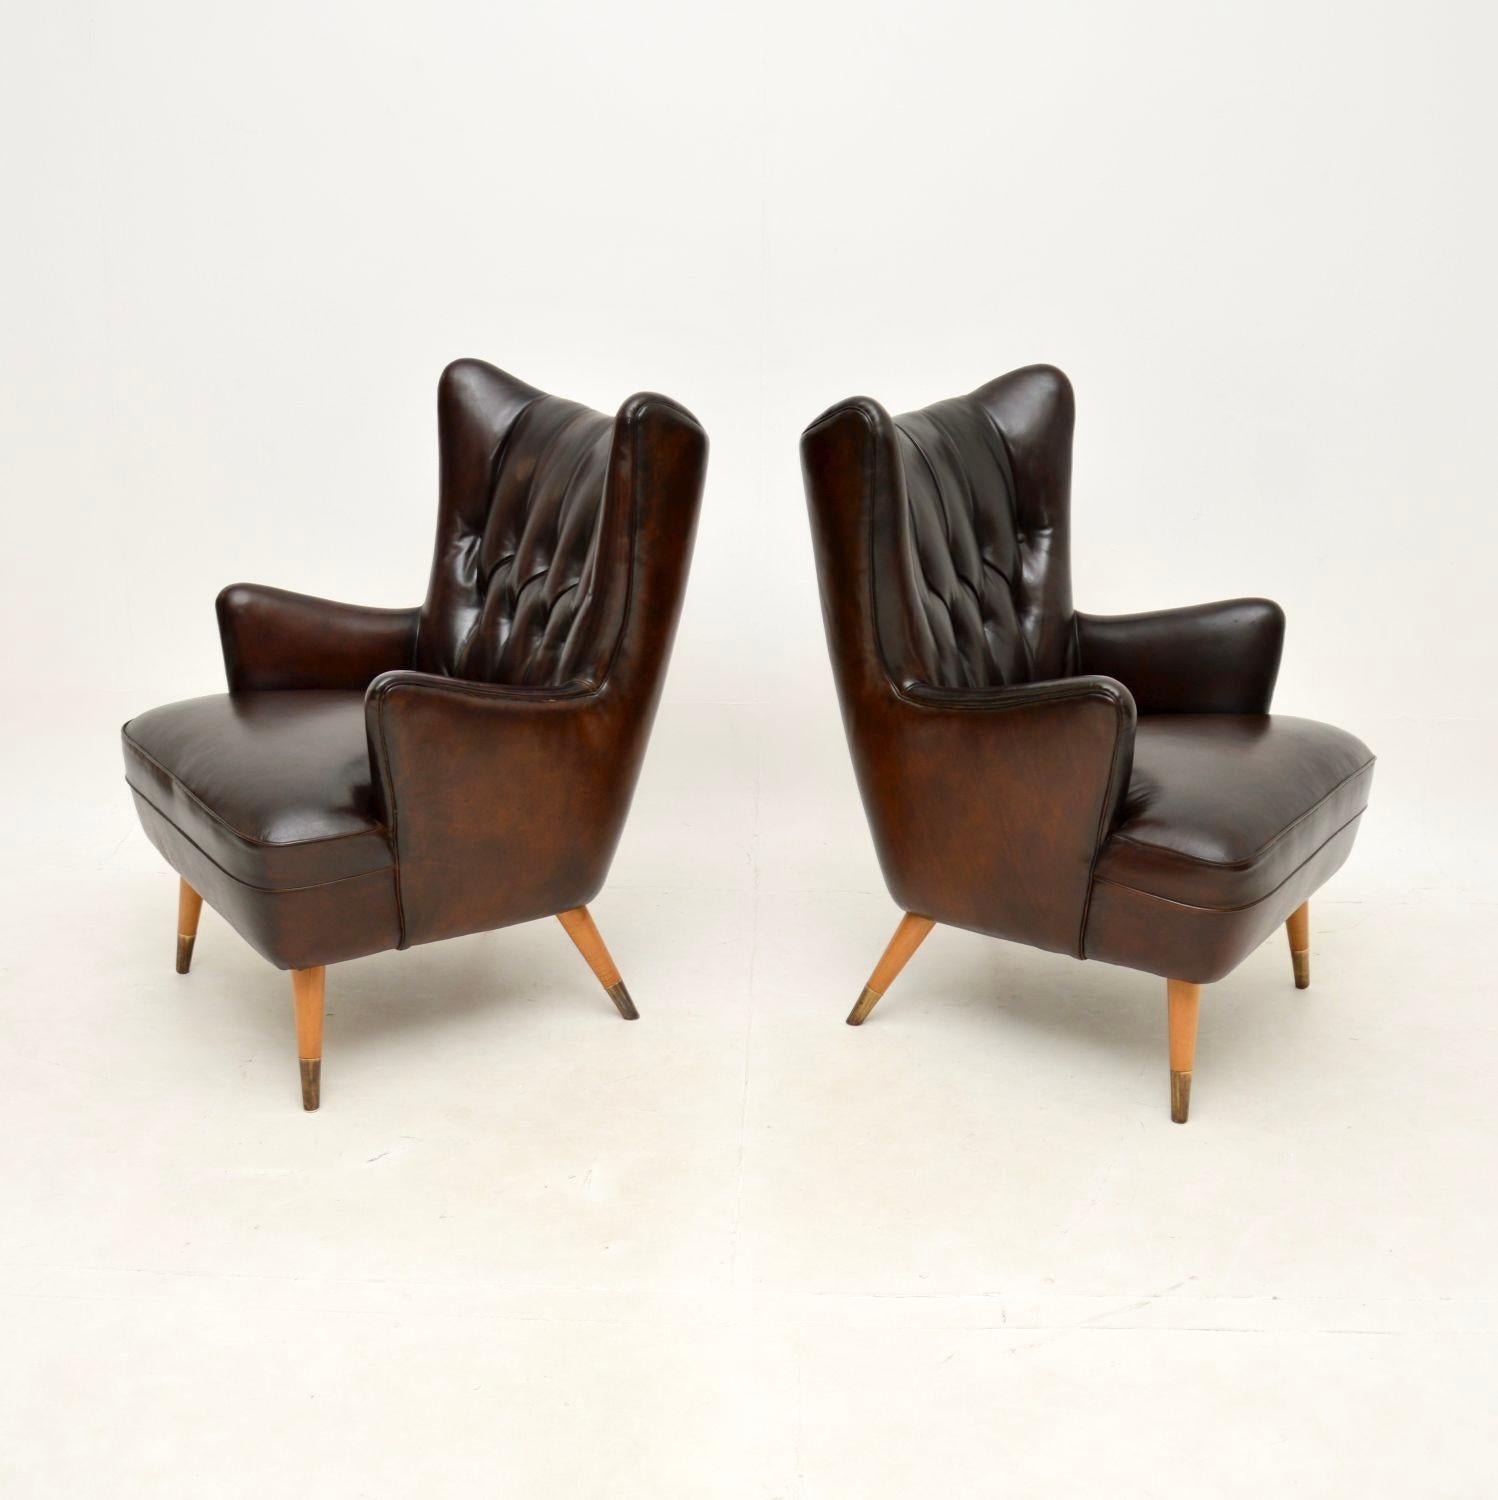 Pair of Vintage Italian Leather Wing Back Armchairs In Good Condition For Sale In London, GB